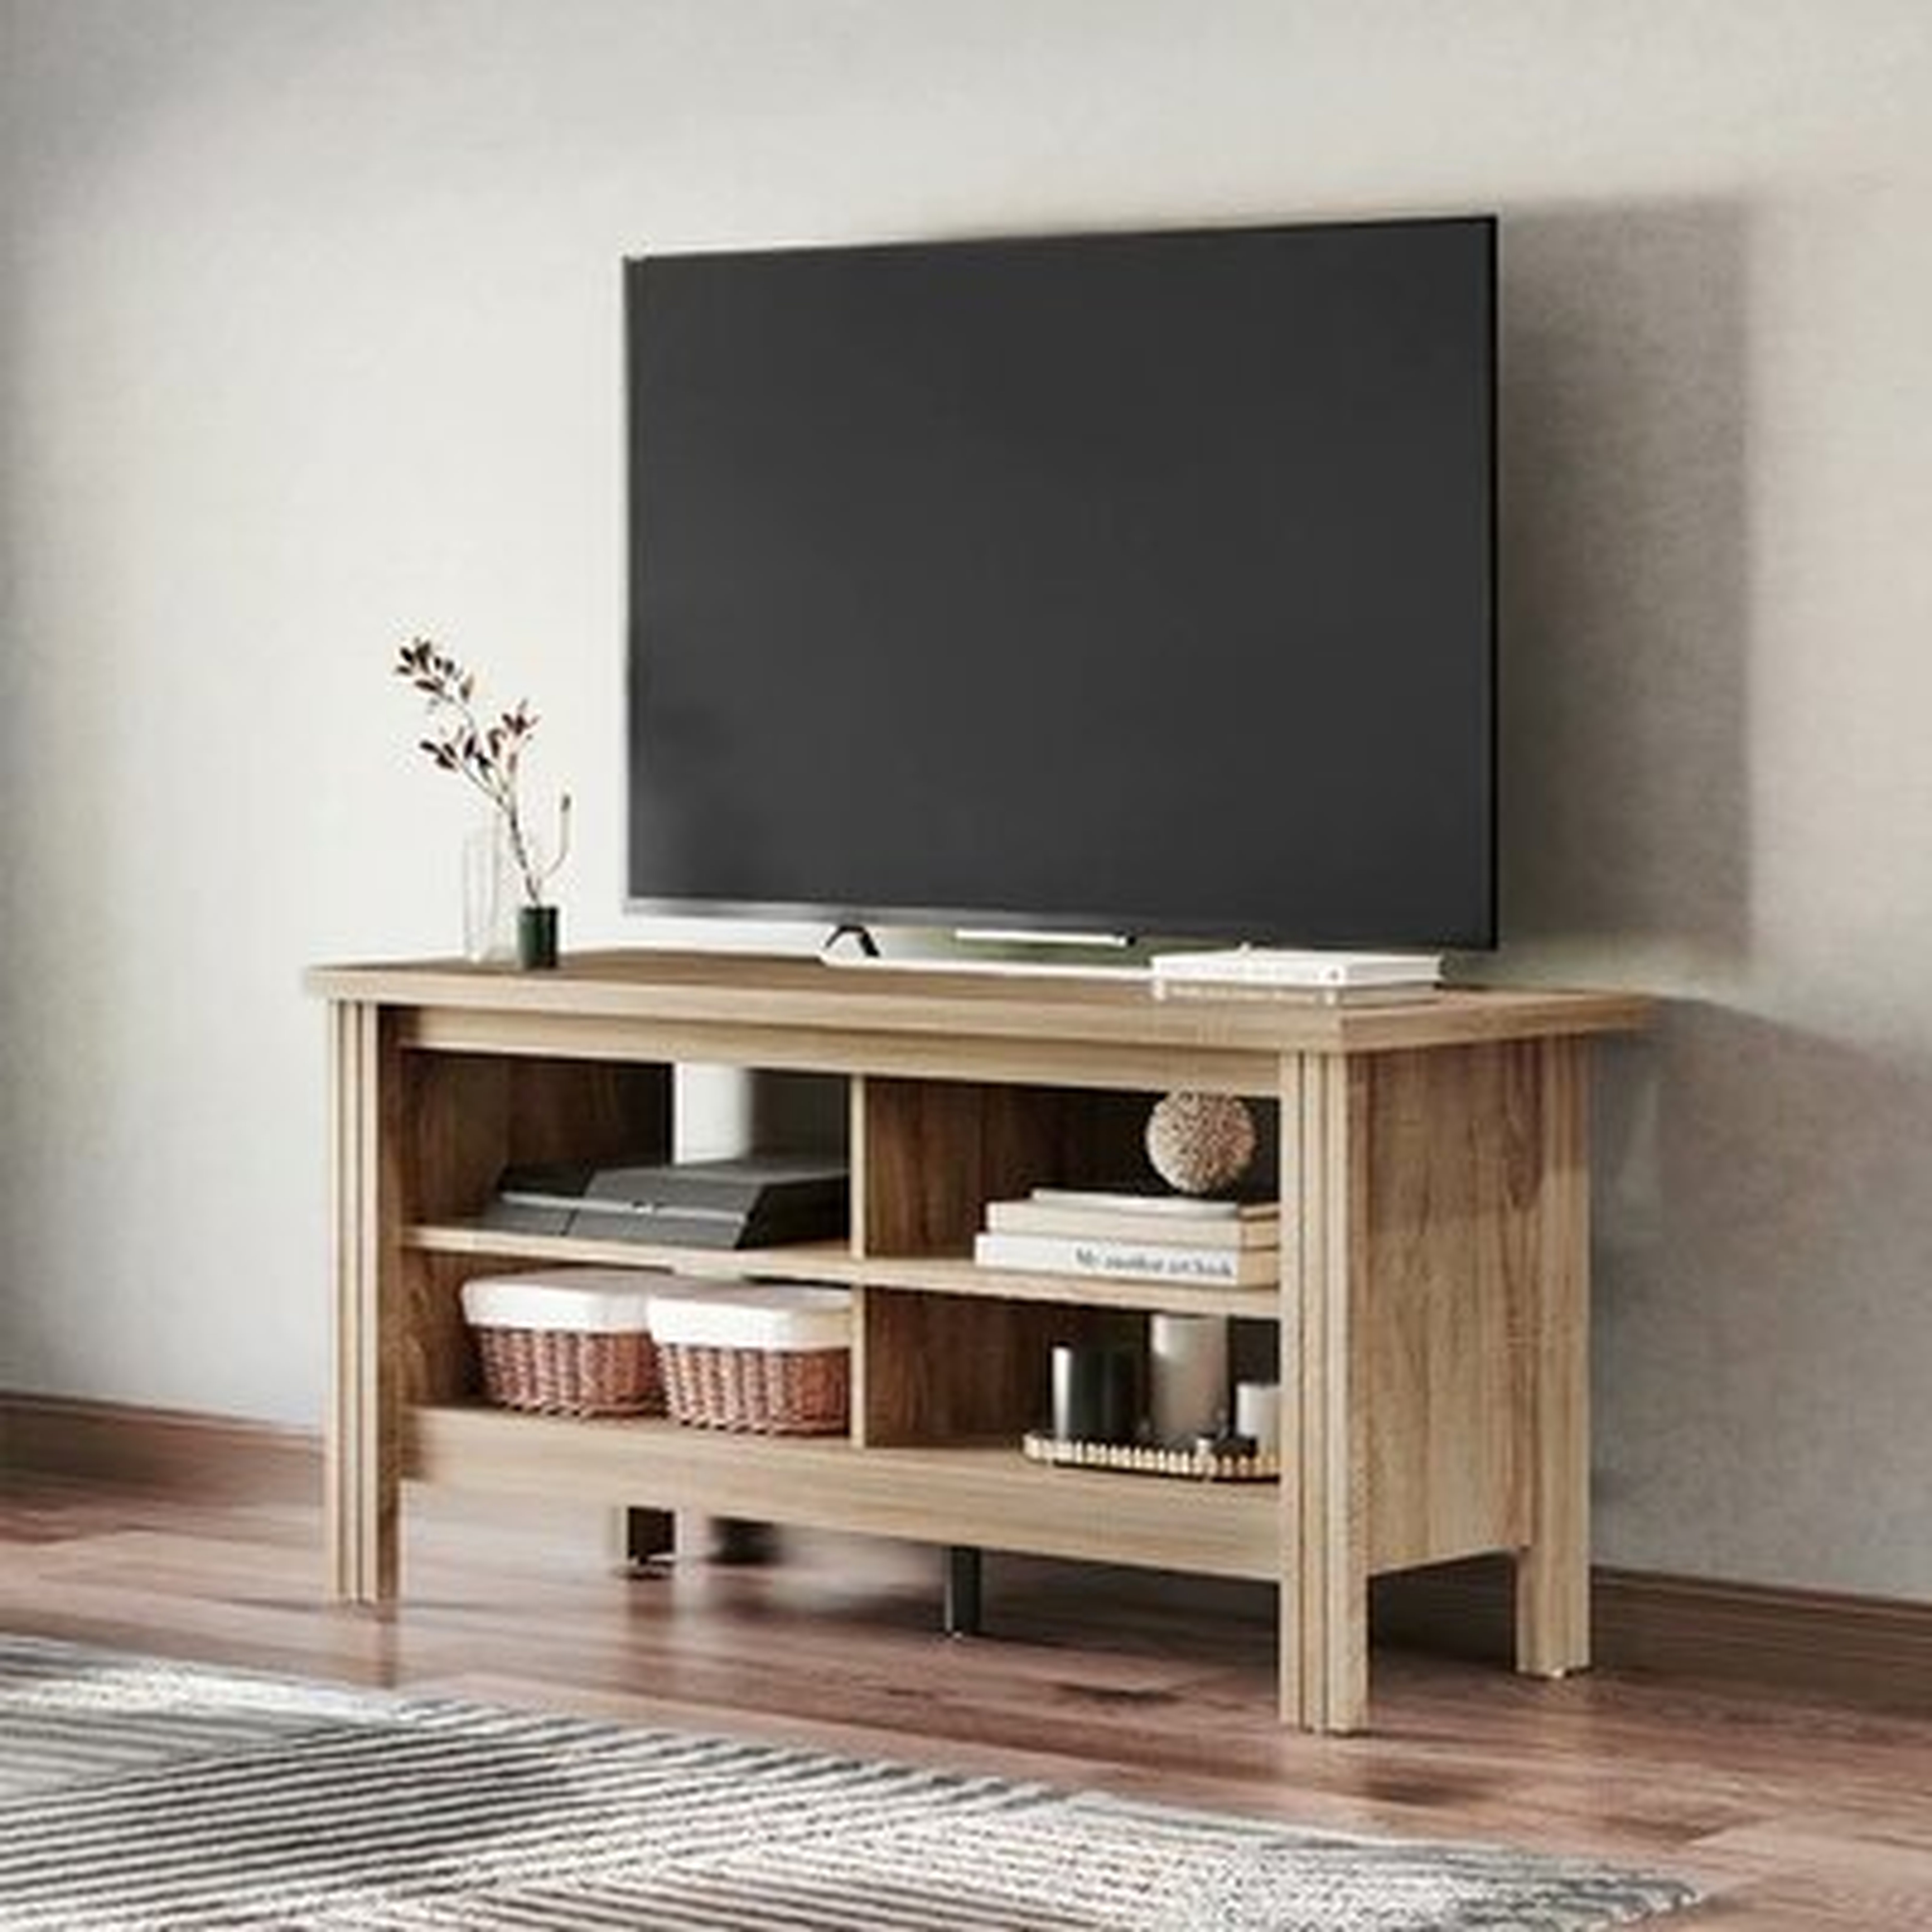 Relic TV Stand for TVs up to 55" - Wayfair